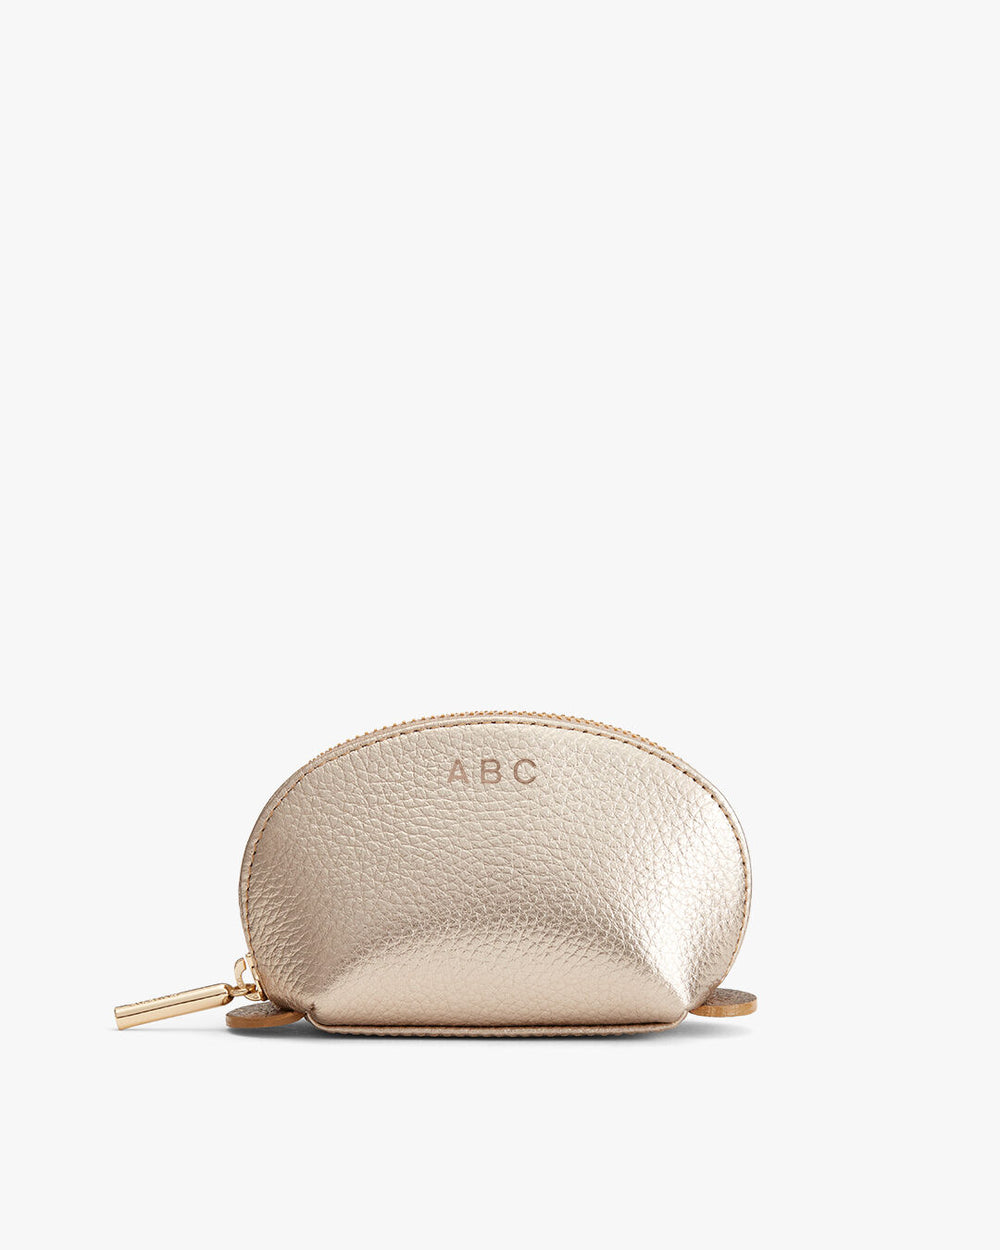 Small pouch with zipper and initials ABC embossed on it.